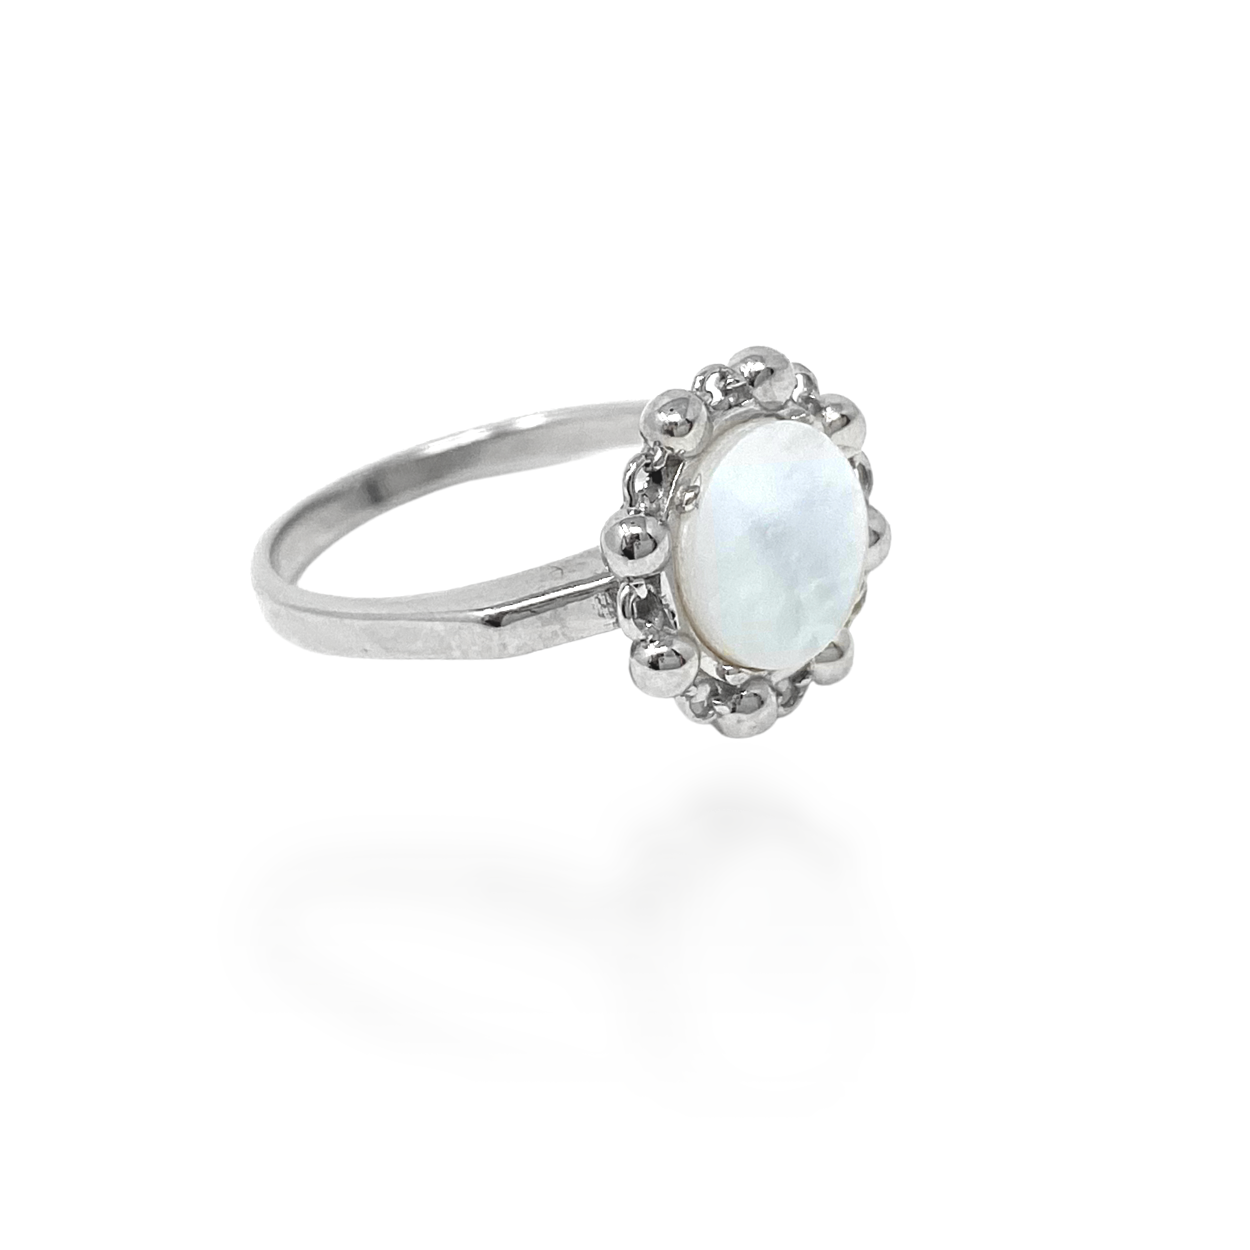 Petite Piazza Ring in Silver with Mother of Pearl